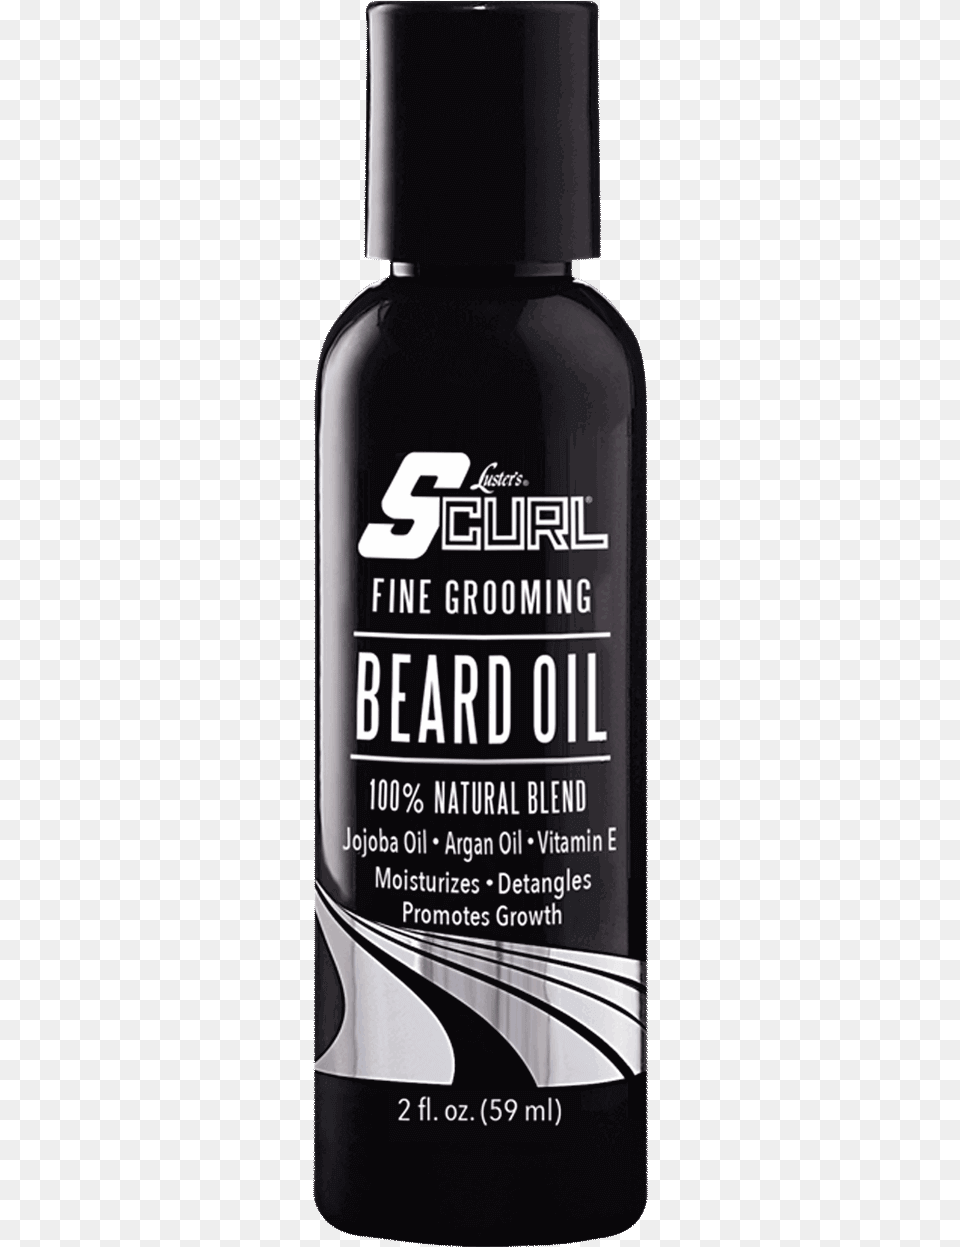 Scurl Beard Oil Luster Products, Bottle, Cosmetics, Perfume Png